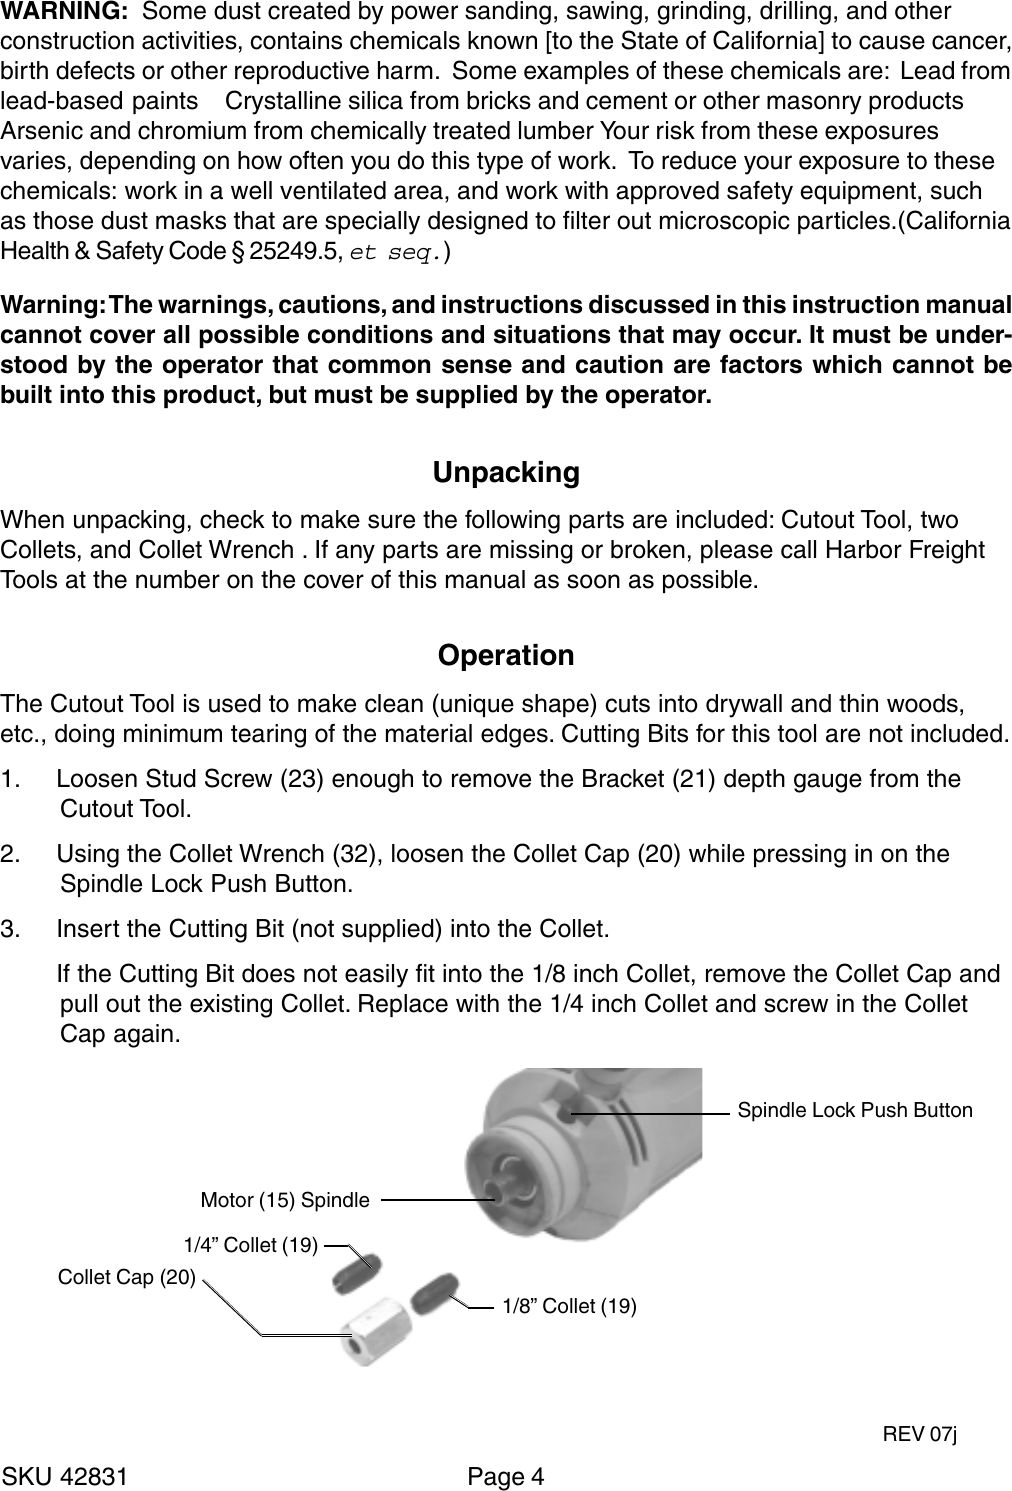 Page 4 of 8 - Harbor-Freight Harbor-Freight-3-5-Amp-Heavy-Duty-Electric-Cutout-Tool-Product-Manual- 42831  Harbor-freight-3-5-amp-heavy-duty-electric-cutout-tool-product-manual